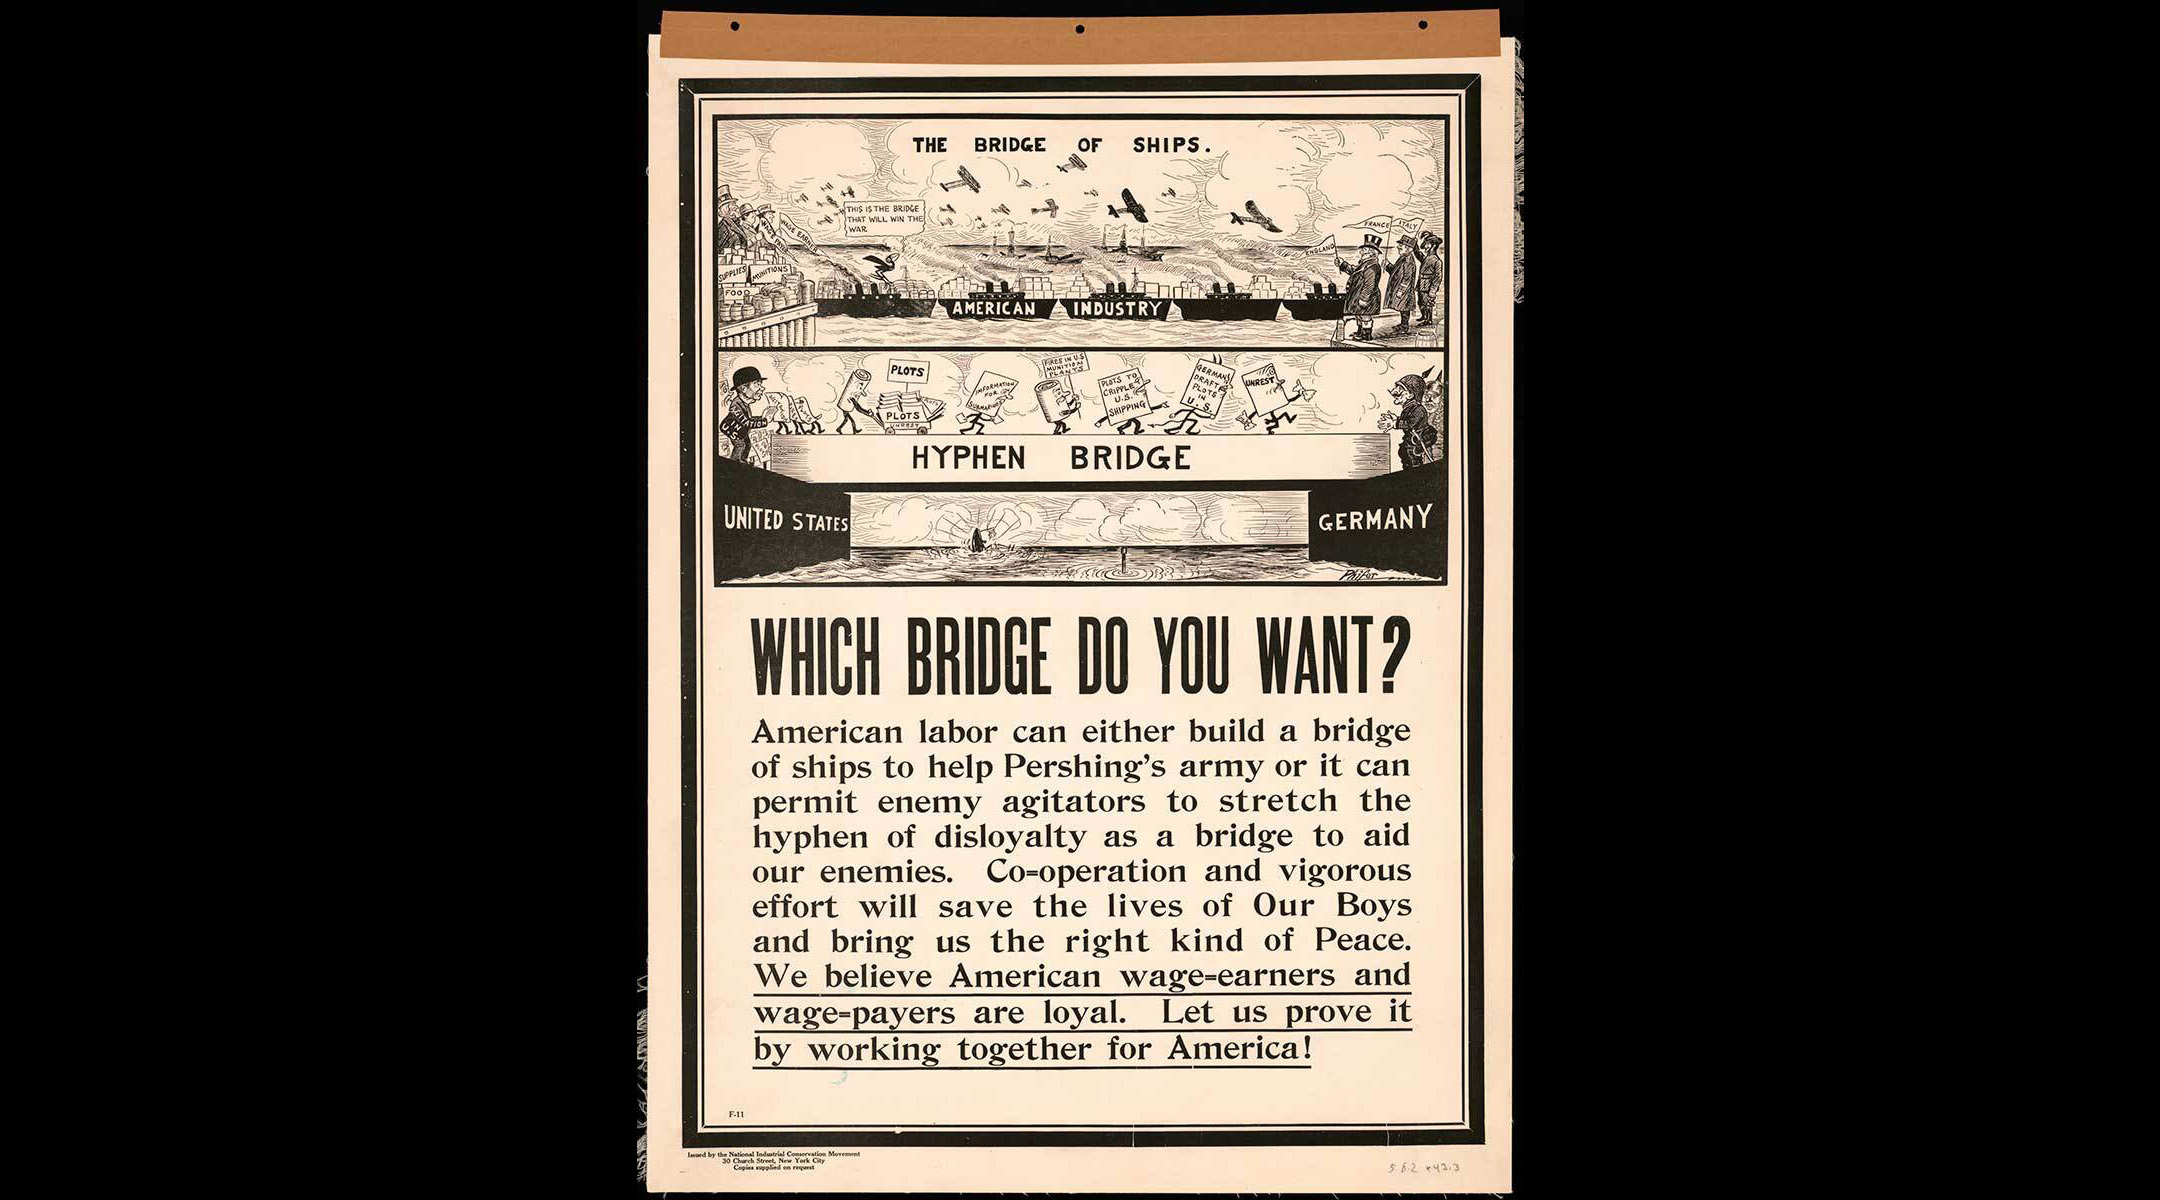 A poster issued by the National Industrial Conservation Movement in 1917 warns that the American war effort might be harmed by a “hyphen of disloyalty,” suggesting immigrants with ties to their homelands were working to aid the enemy. (Prints and Photographs Division, Library of Congress)